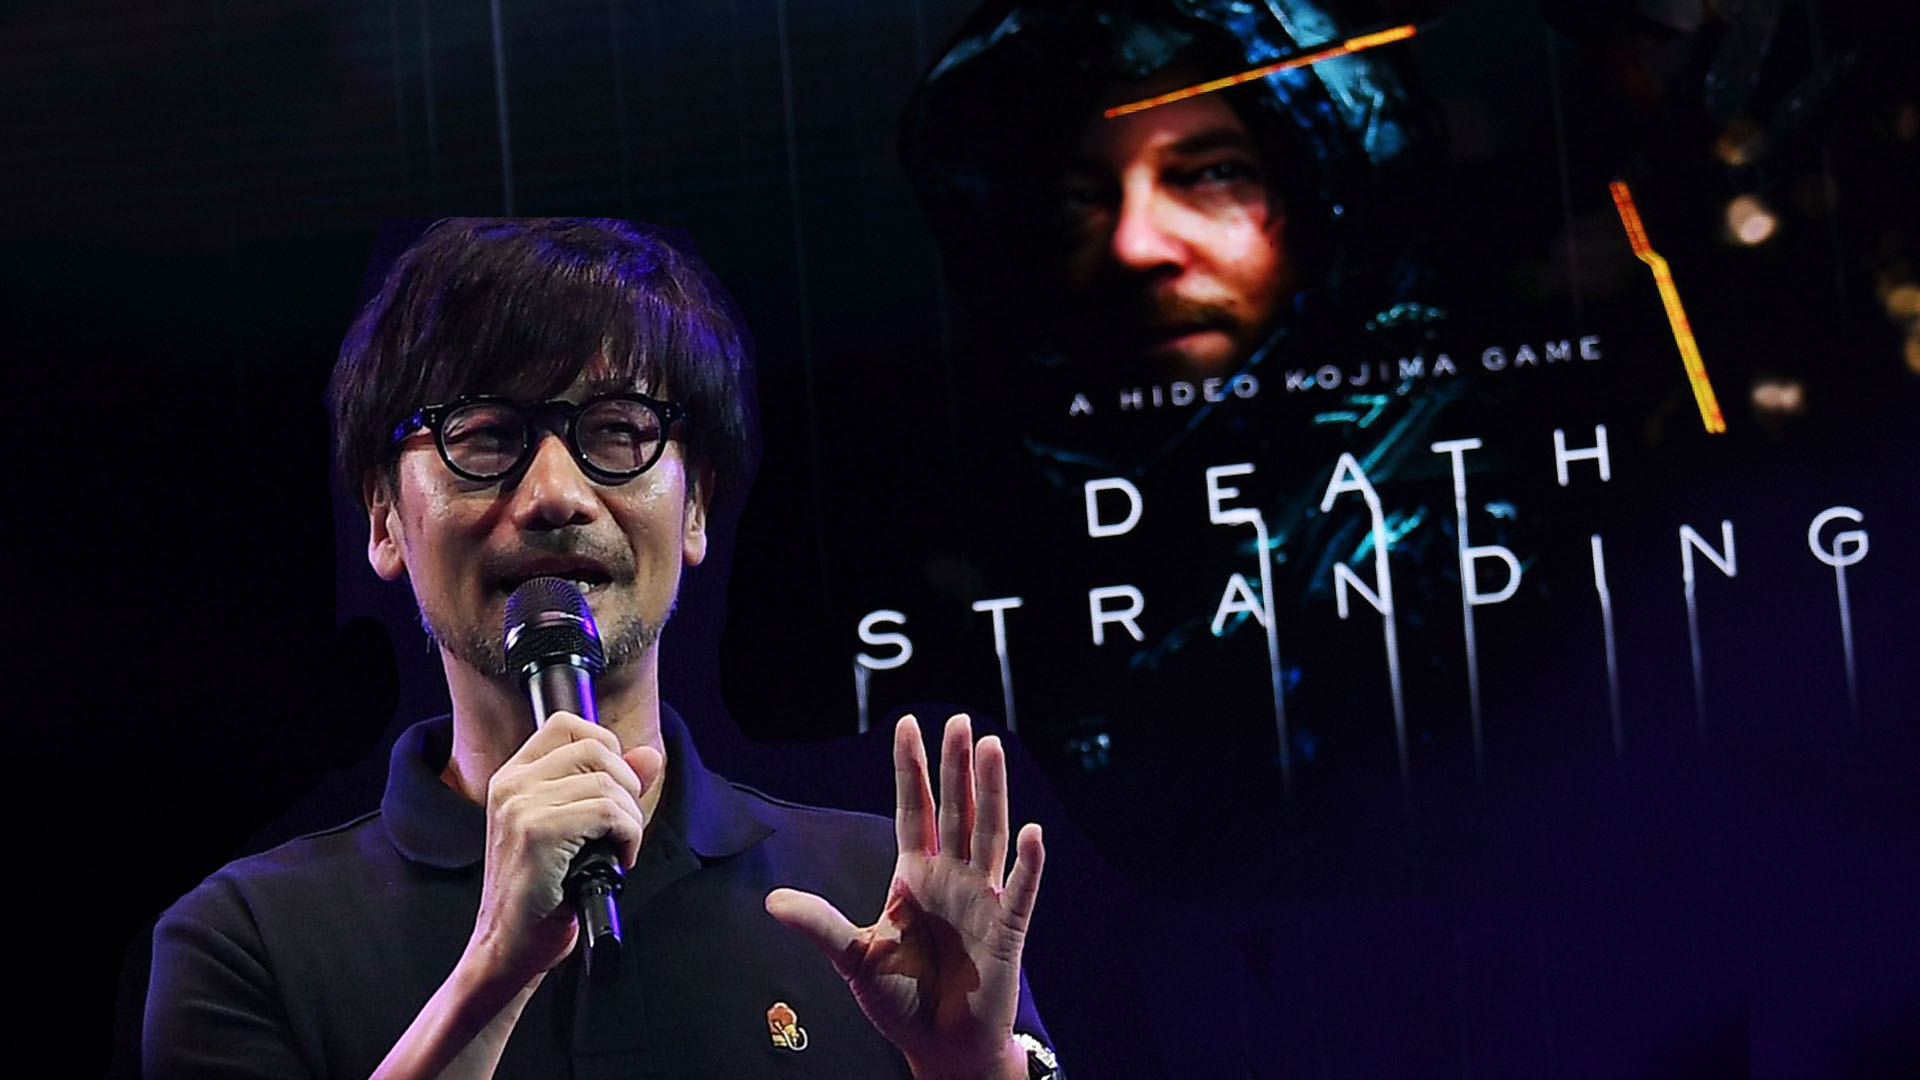 Hodgepodge and Flimflam — Guise, I live for Hideo Kojima fangirling over